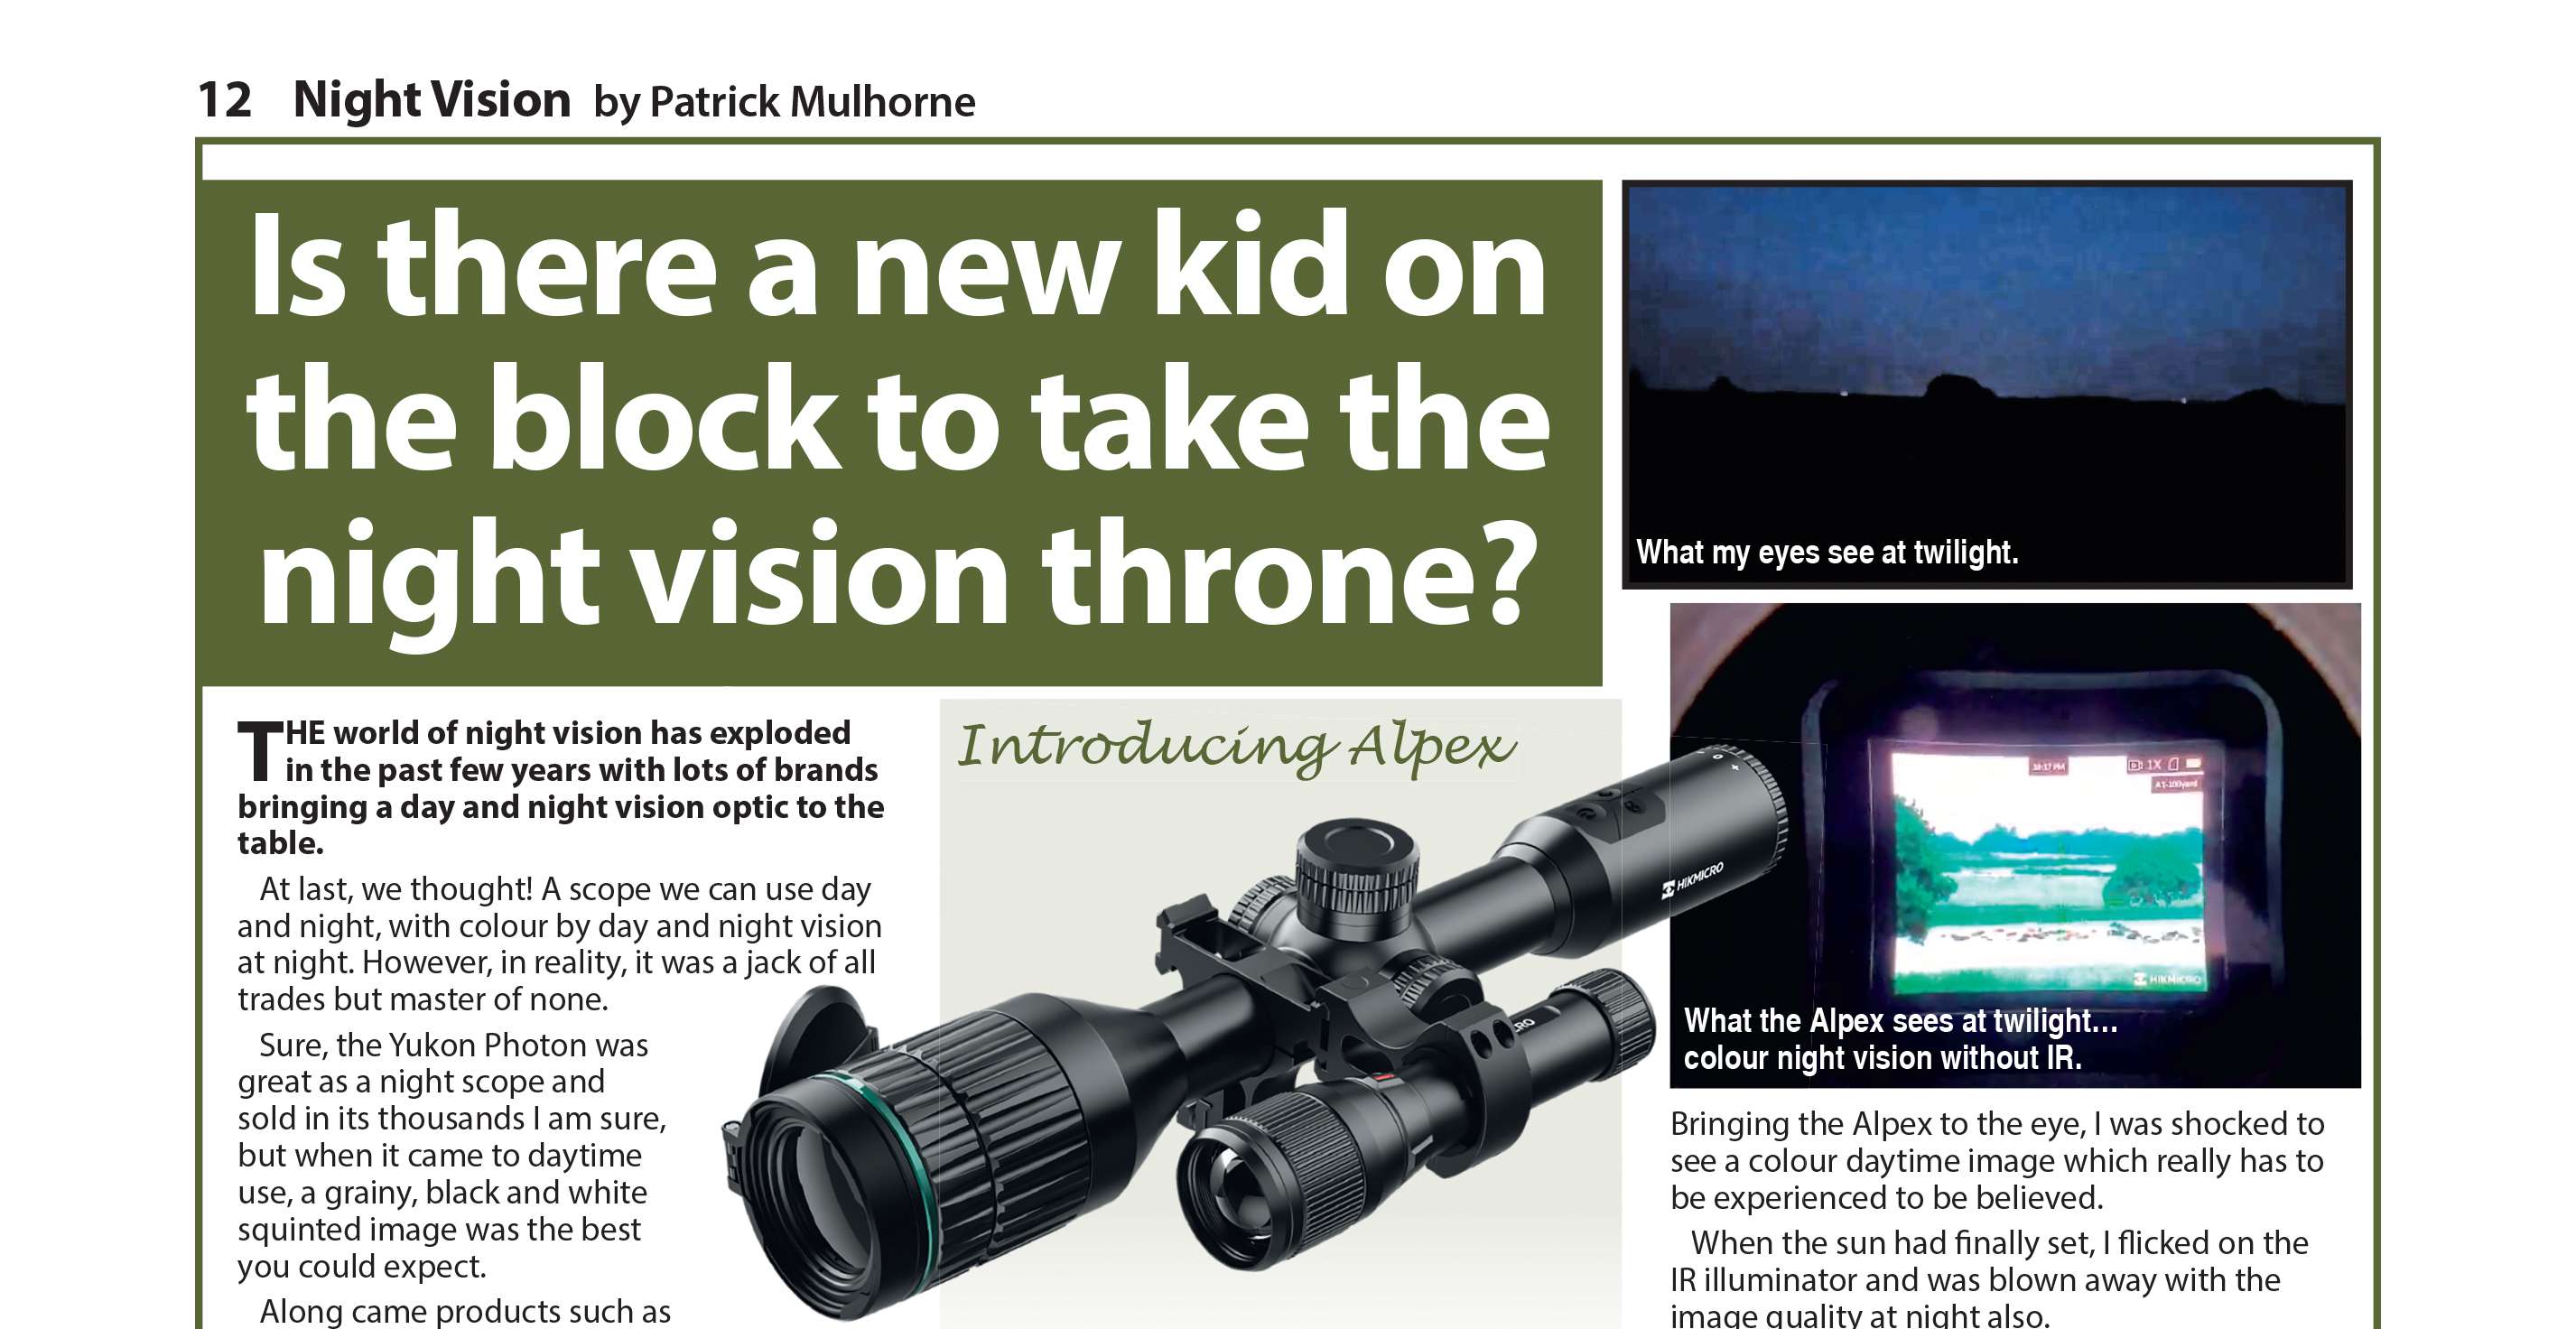 Is there a new kid on the block to take the Night Vision Throne